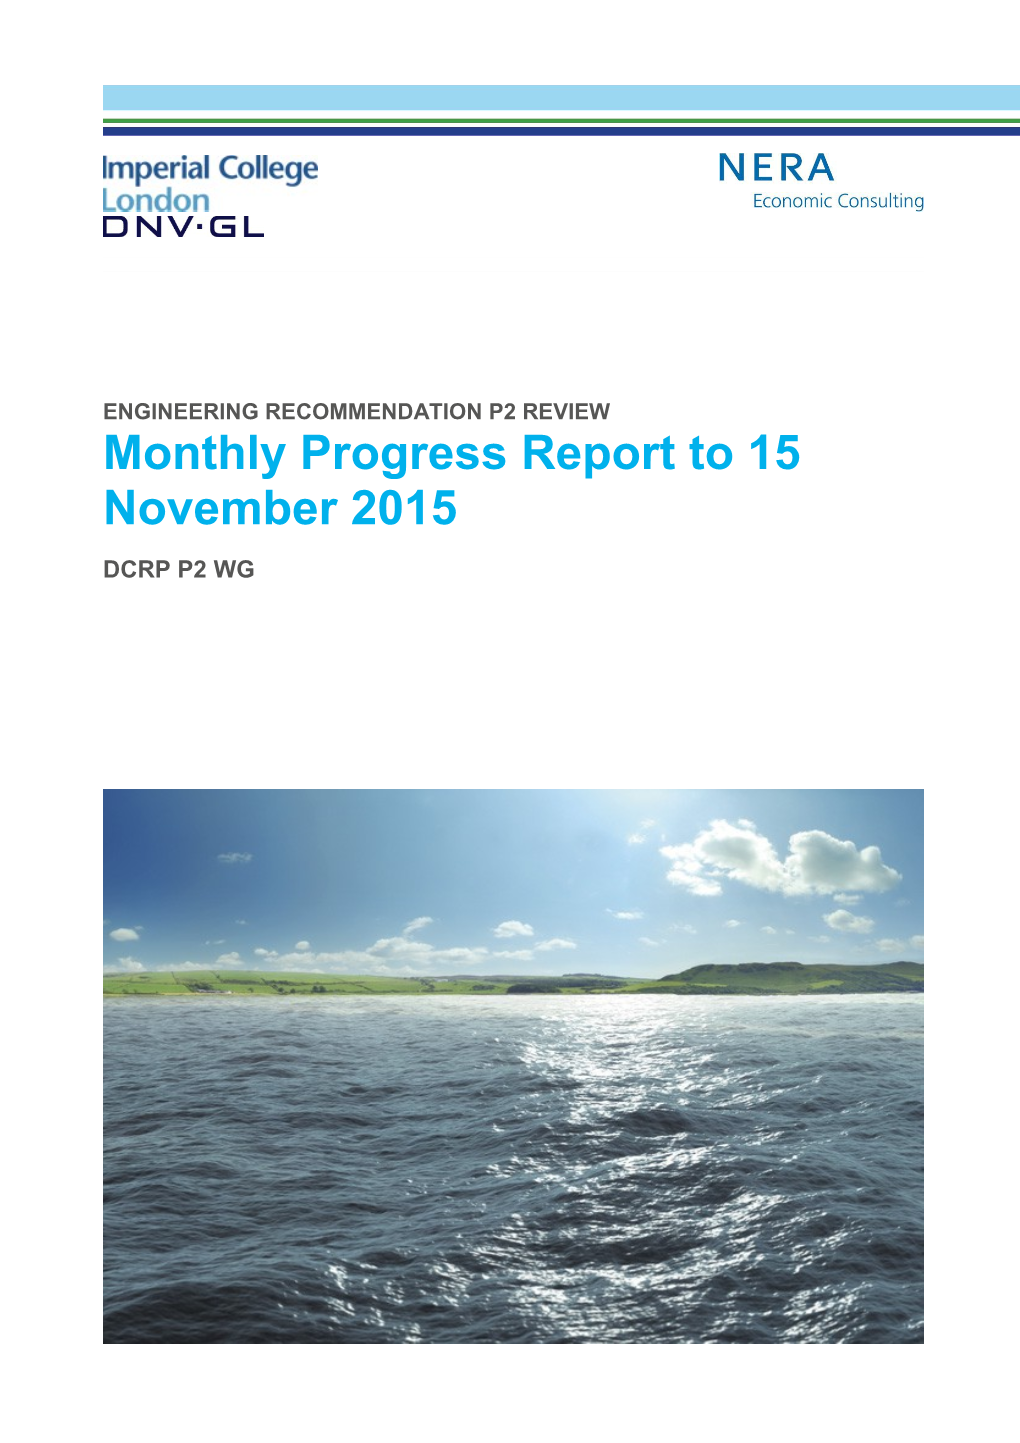 This Document Reports on the Monthly Progress Made by the Consortium for the P2 Review